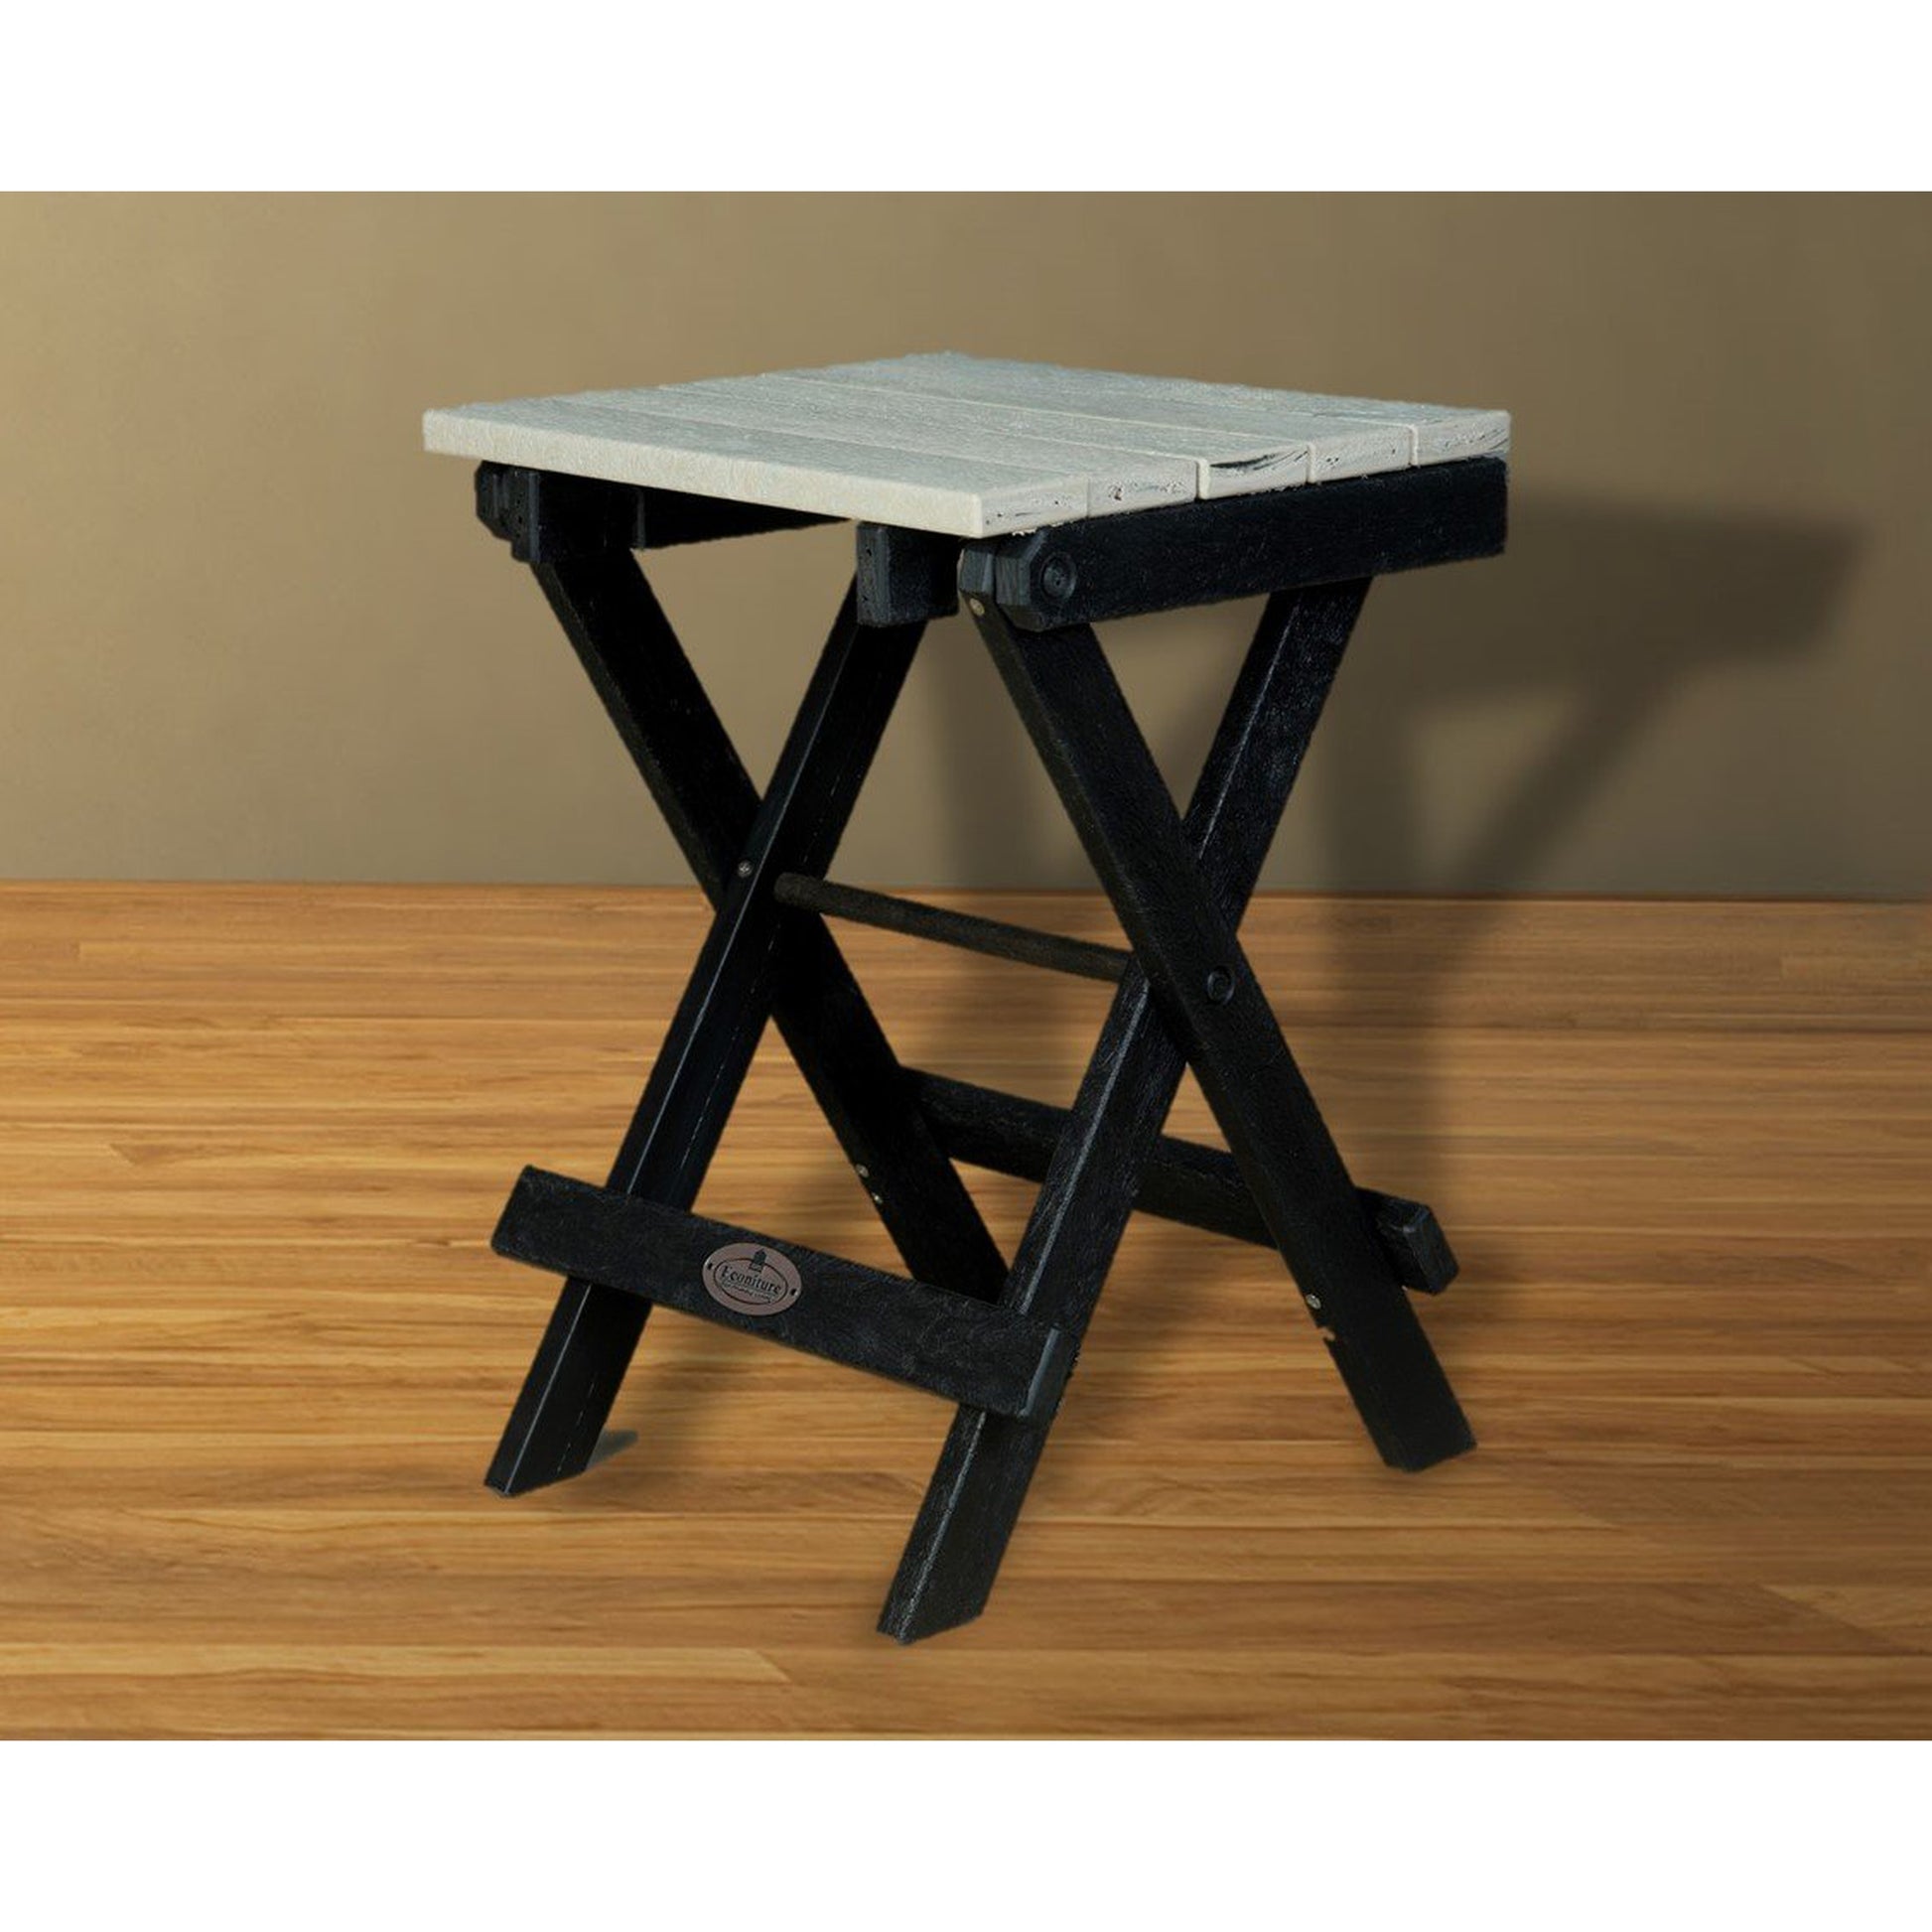 Econiture Azure Portable Folding Stool - The Teal Thread